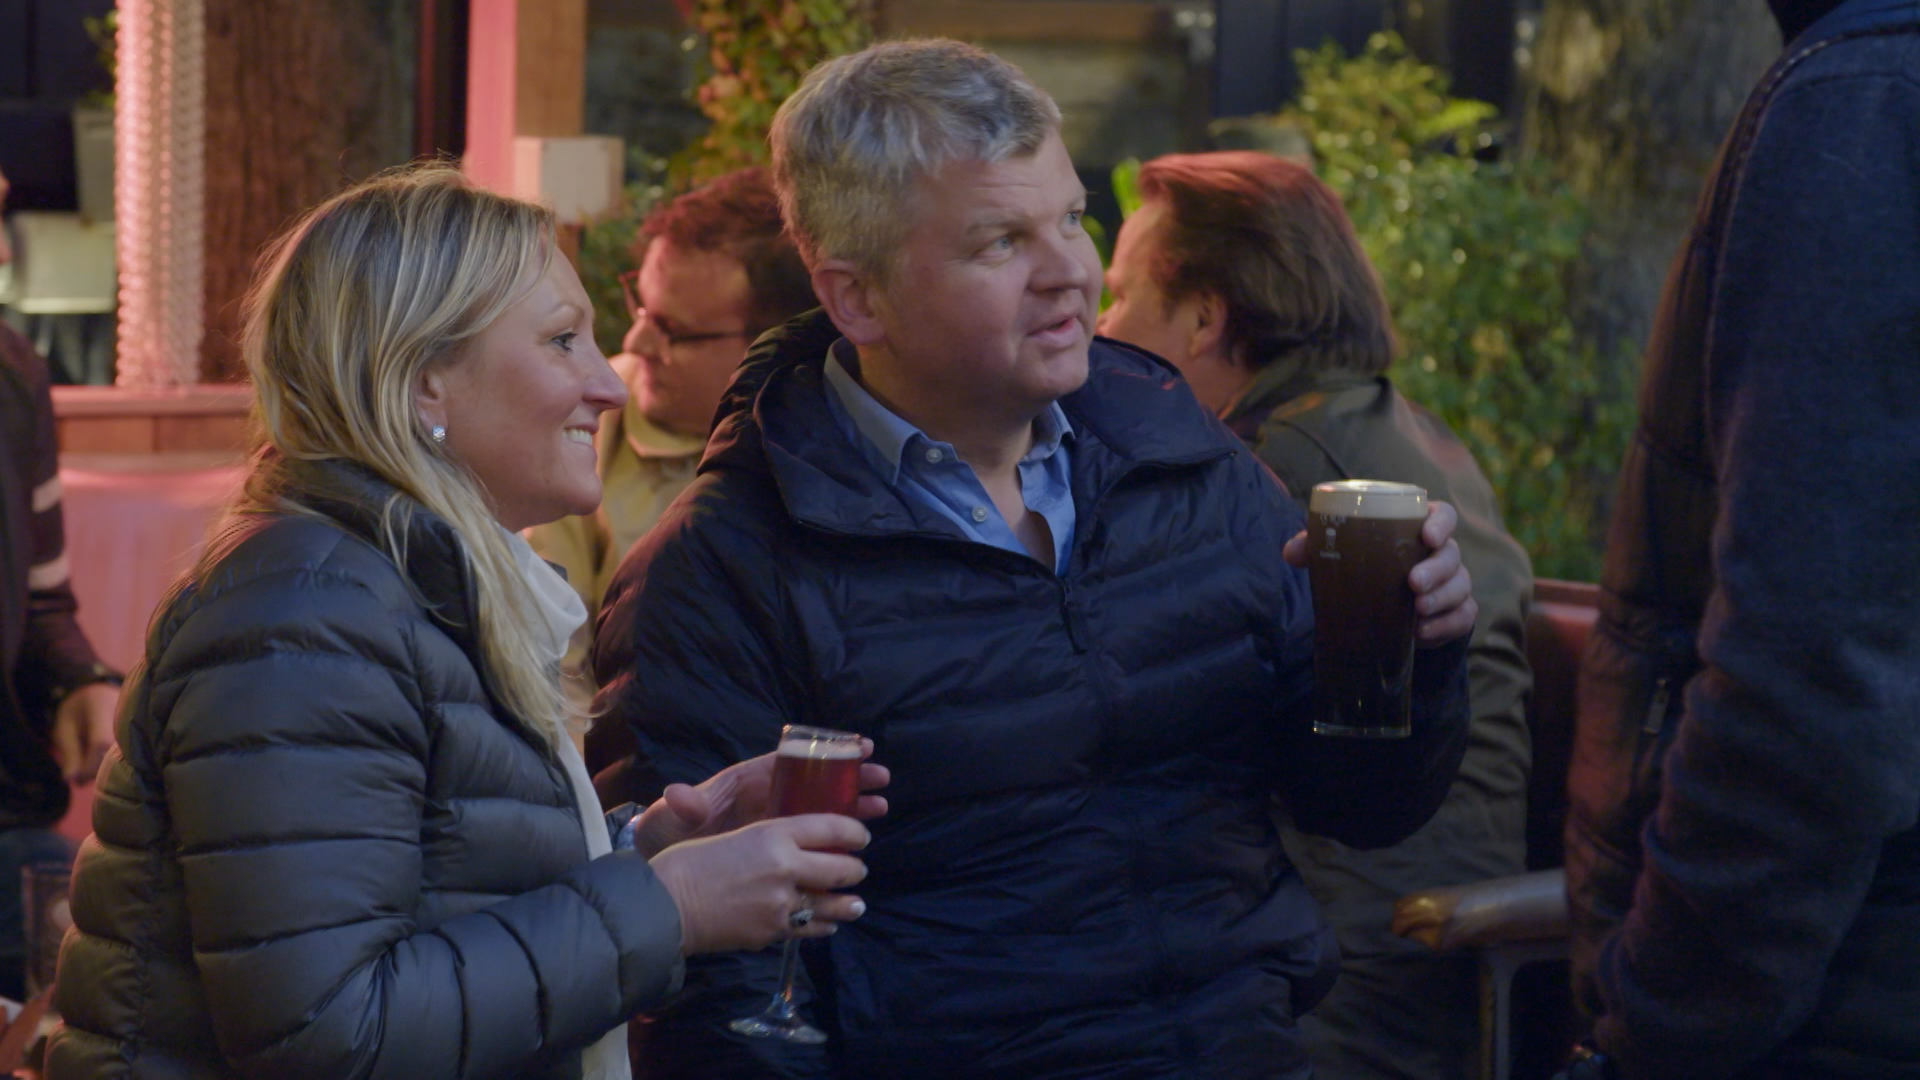 Adrian Chiles and a woman with beer